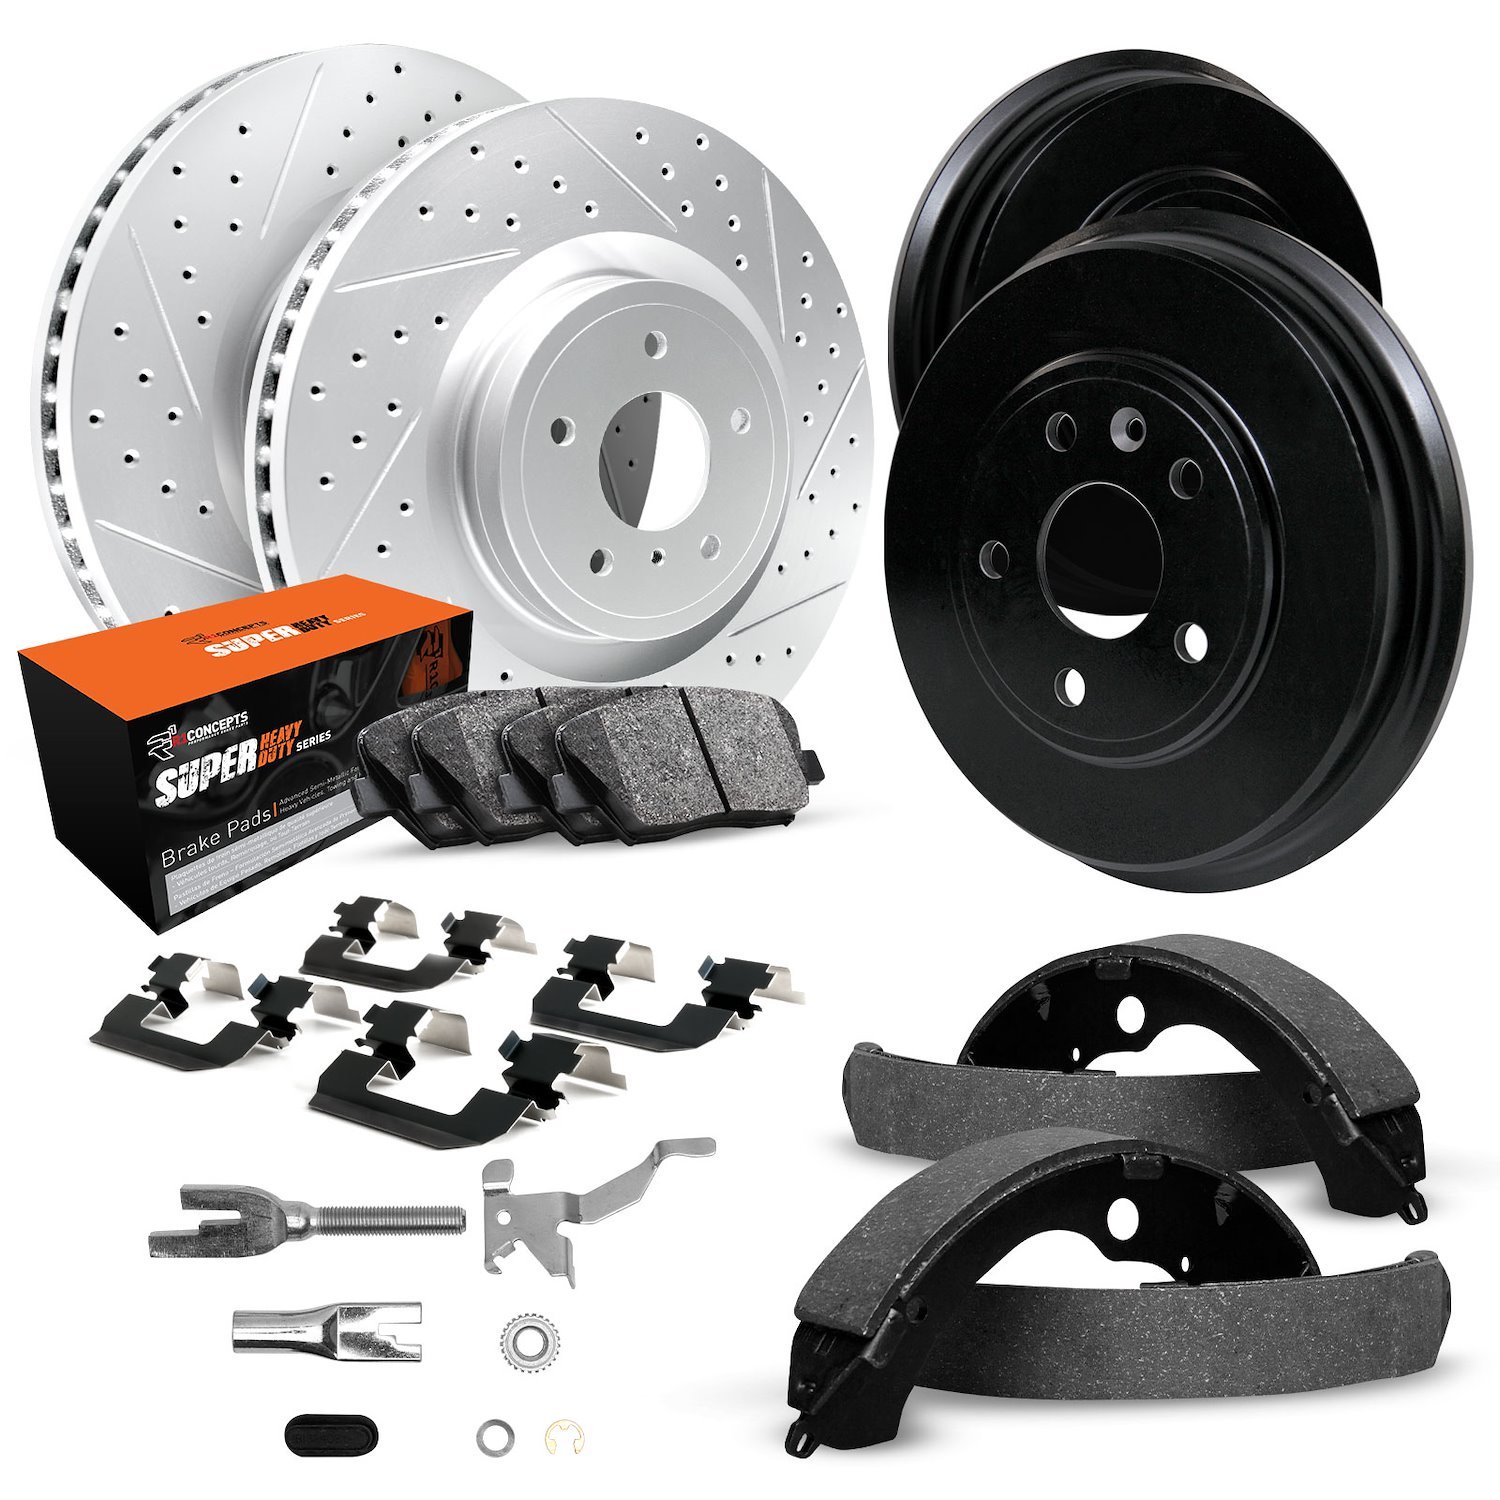 GEO-Carbon Drilled/Slotted Rotors/Drums w/Super-Duty Pads/Shoes/Hardware/Adjusters, 1979-1979 GM, Position: Front/Rear